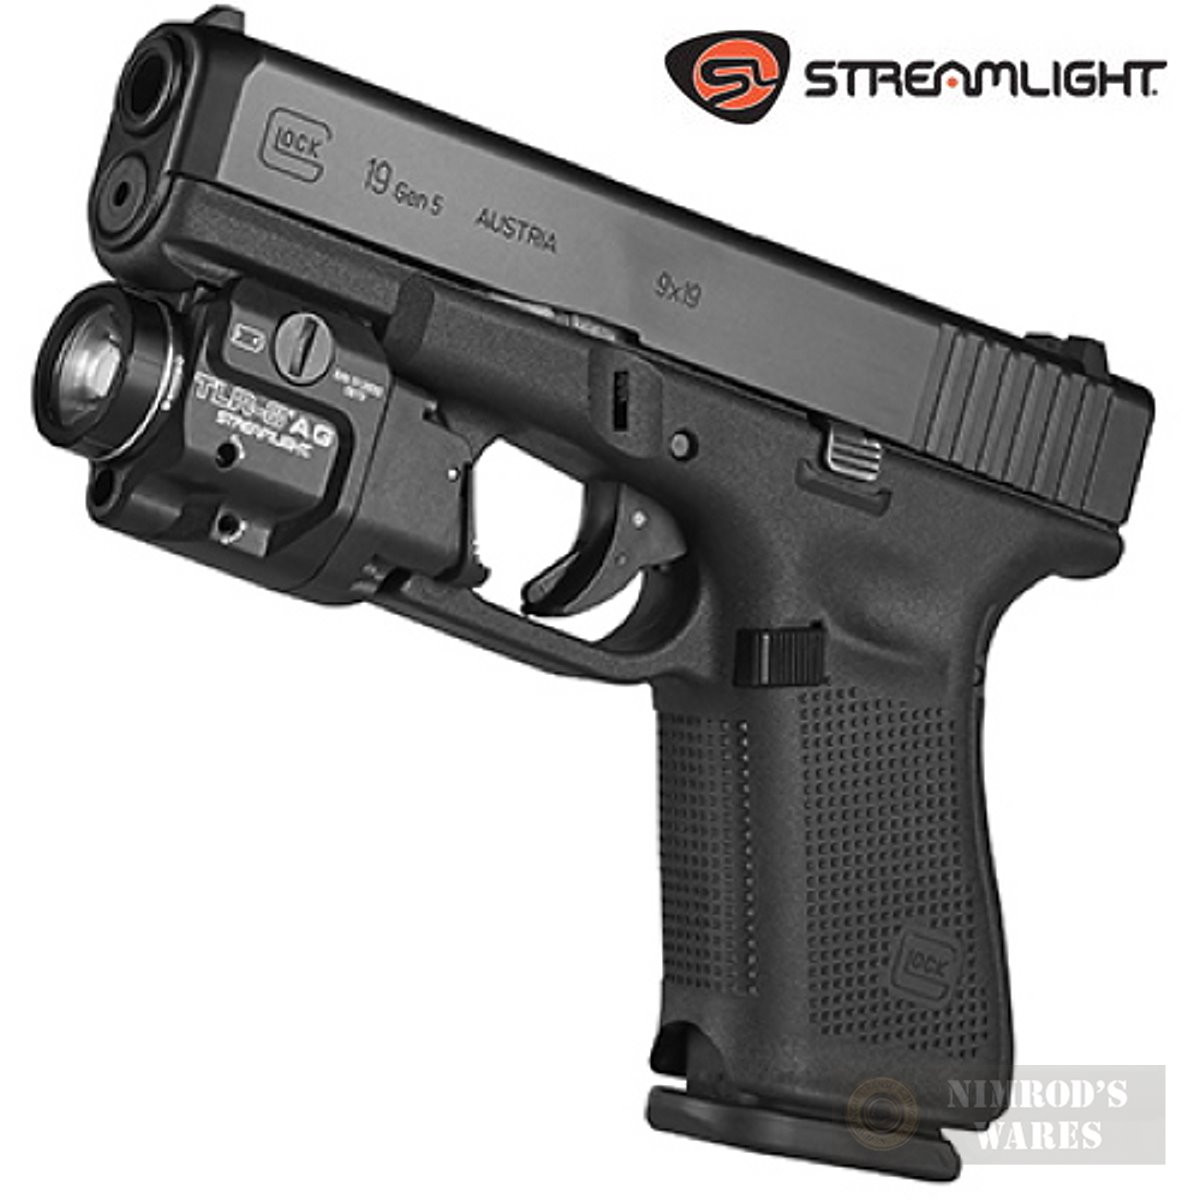 69434 for sale online Streamlight TLR-8A Flex Gun Mount Flashlight with Green Laser and Rear Switch 